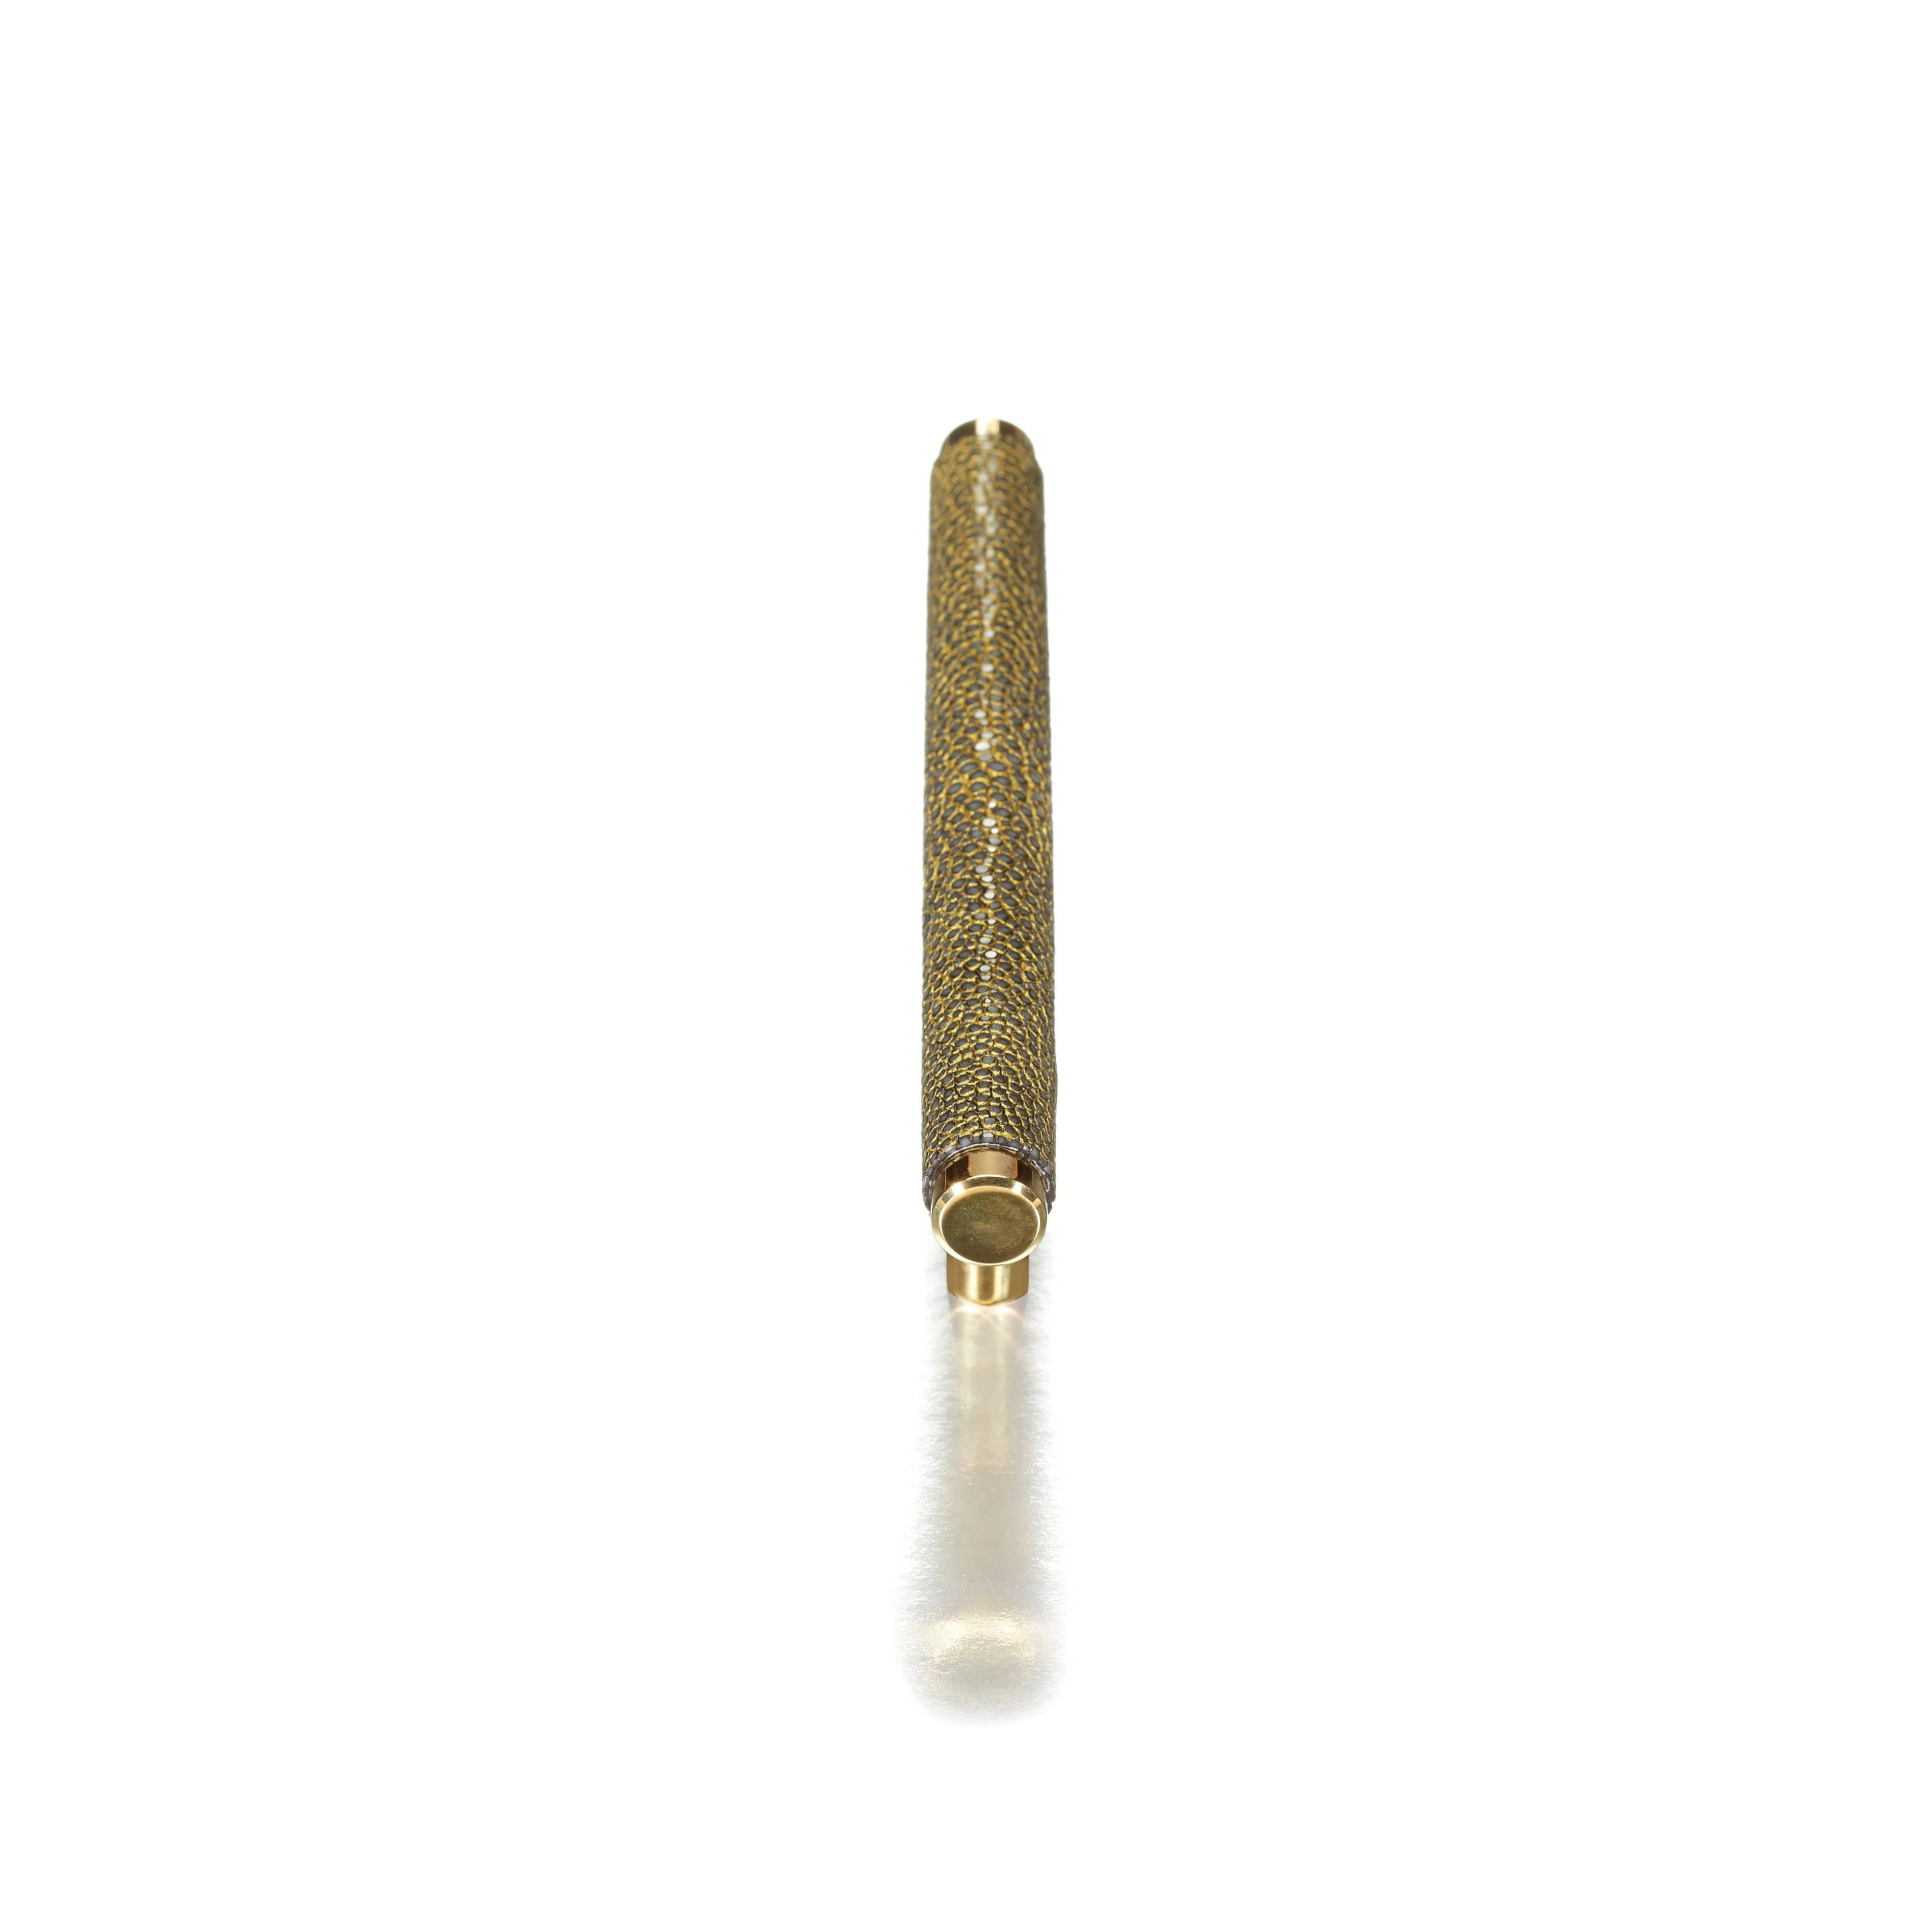 Solid brass and wrapped, hand-dyed shagreen cabinet pull, encrusted with gold.